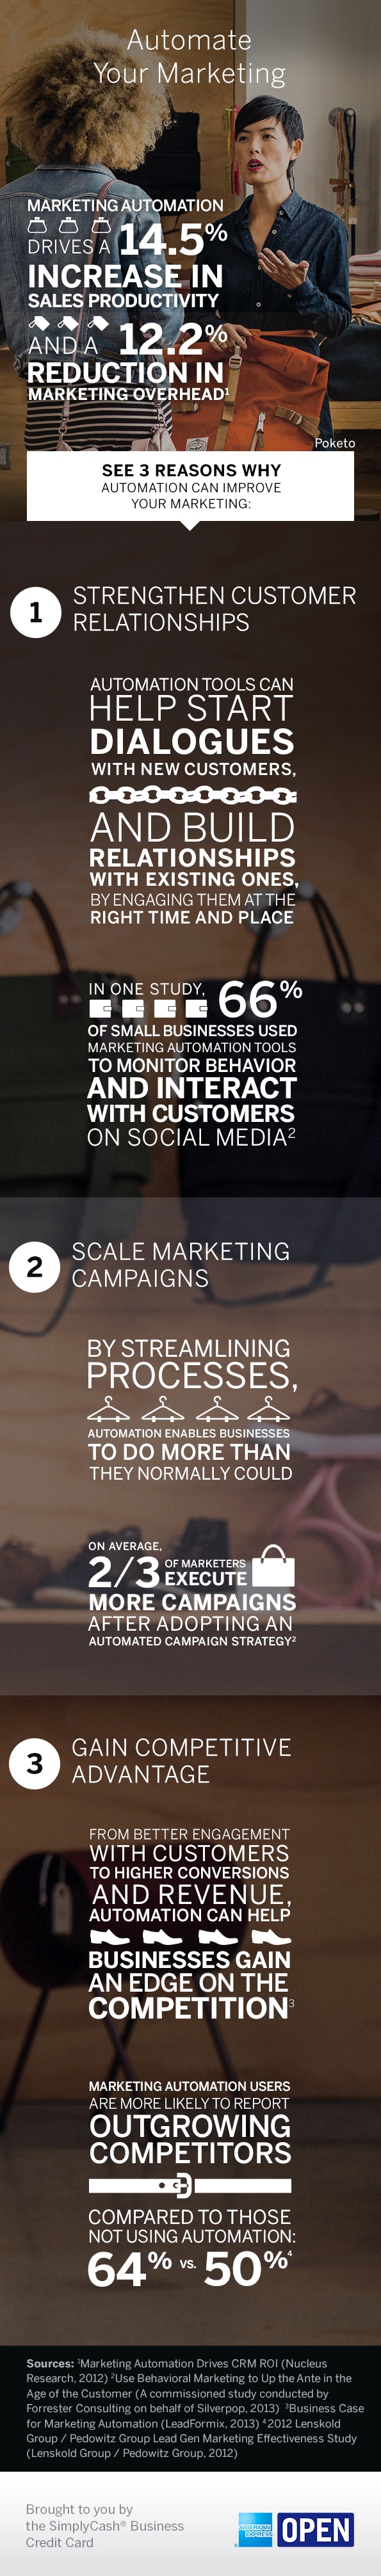 3 Simple Reasons to Use Marketing Automation